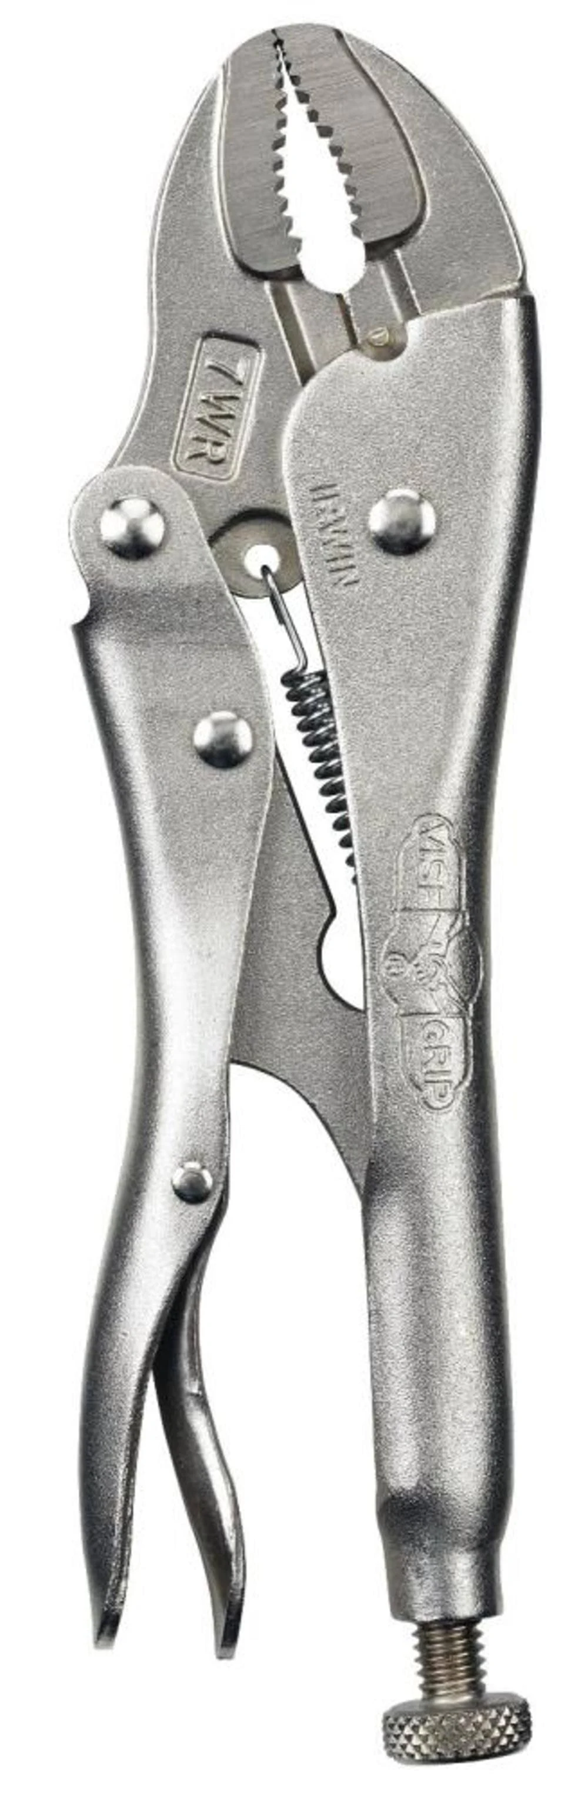 IRWIN VISE-GRIP New Fast Release Curved Jaw Locking Pliers with Wire Cutter 2